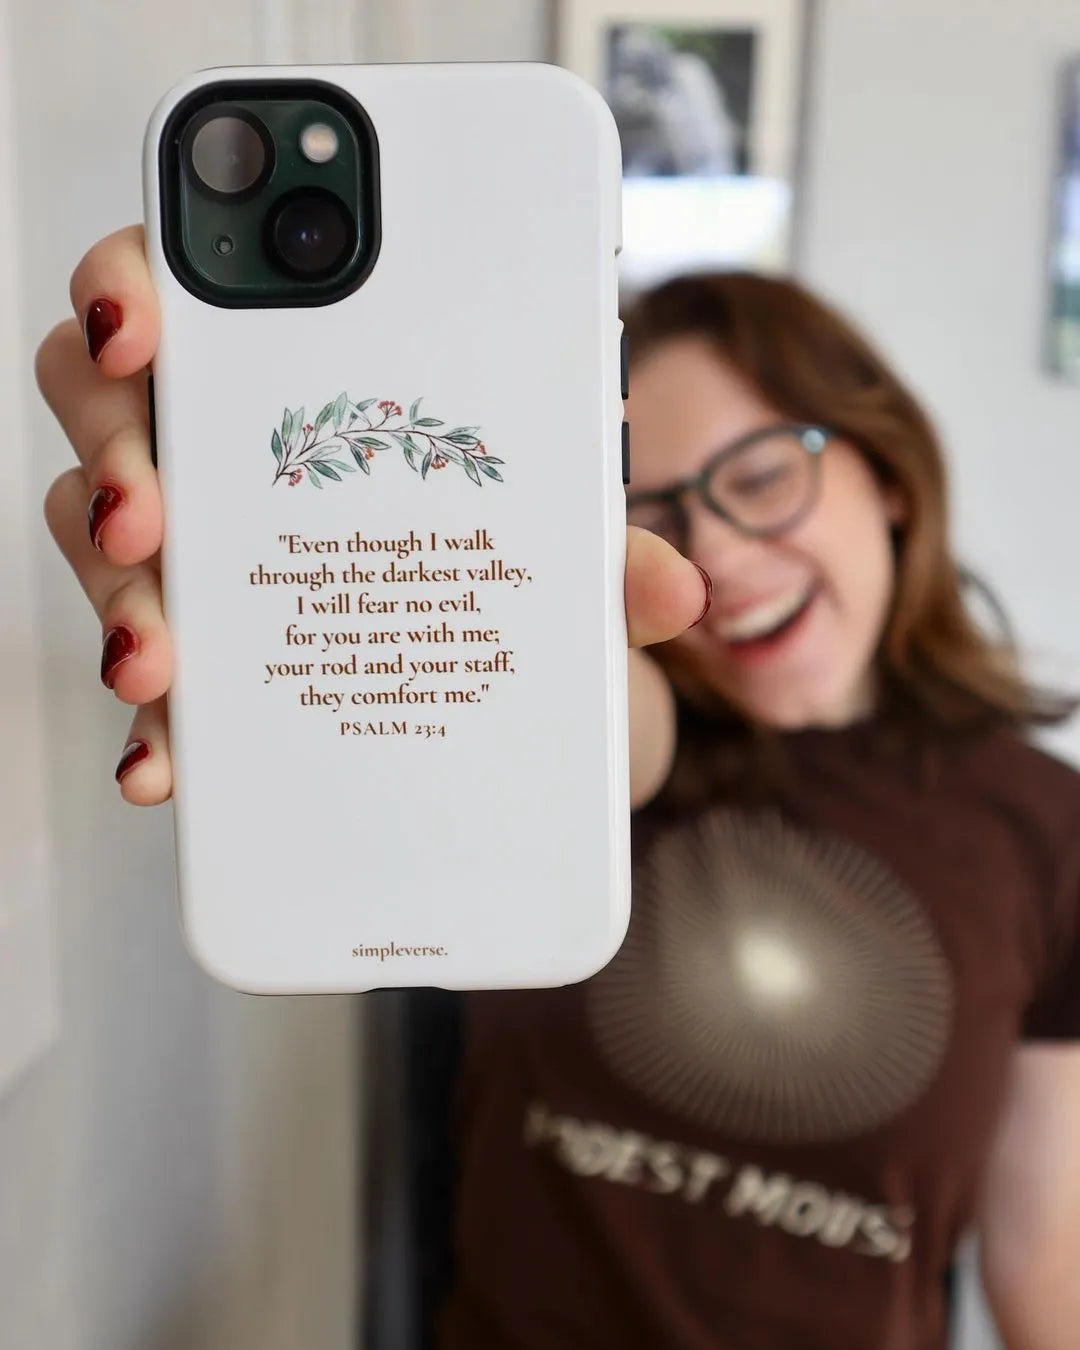 A person holding a white iPhone case with Psalm 23:4 verse and floral design, symbolizing peace and protection.